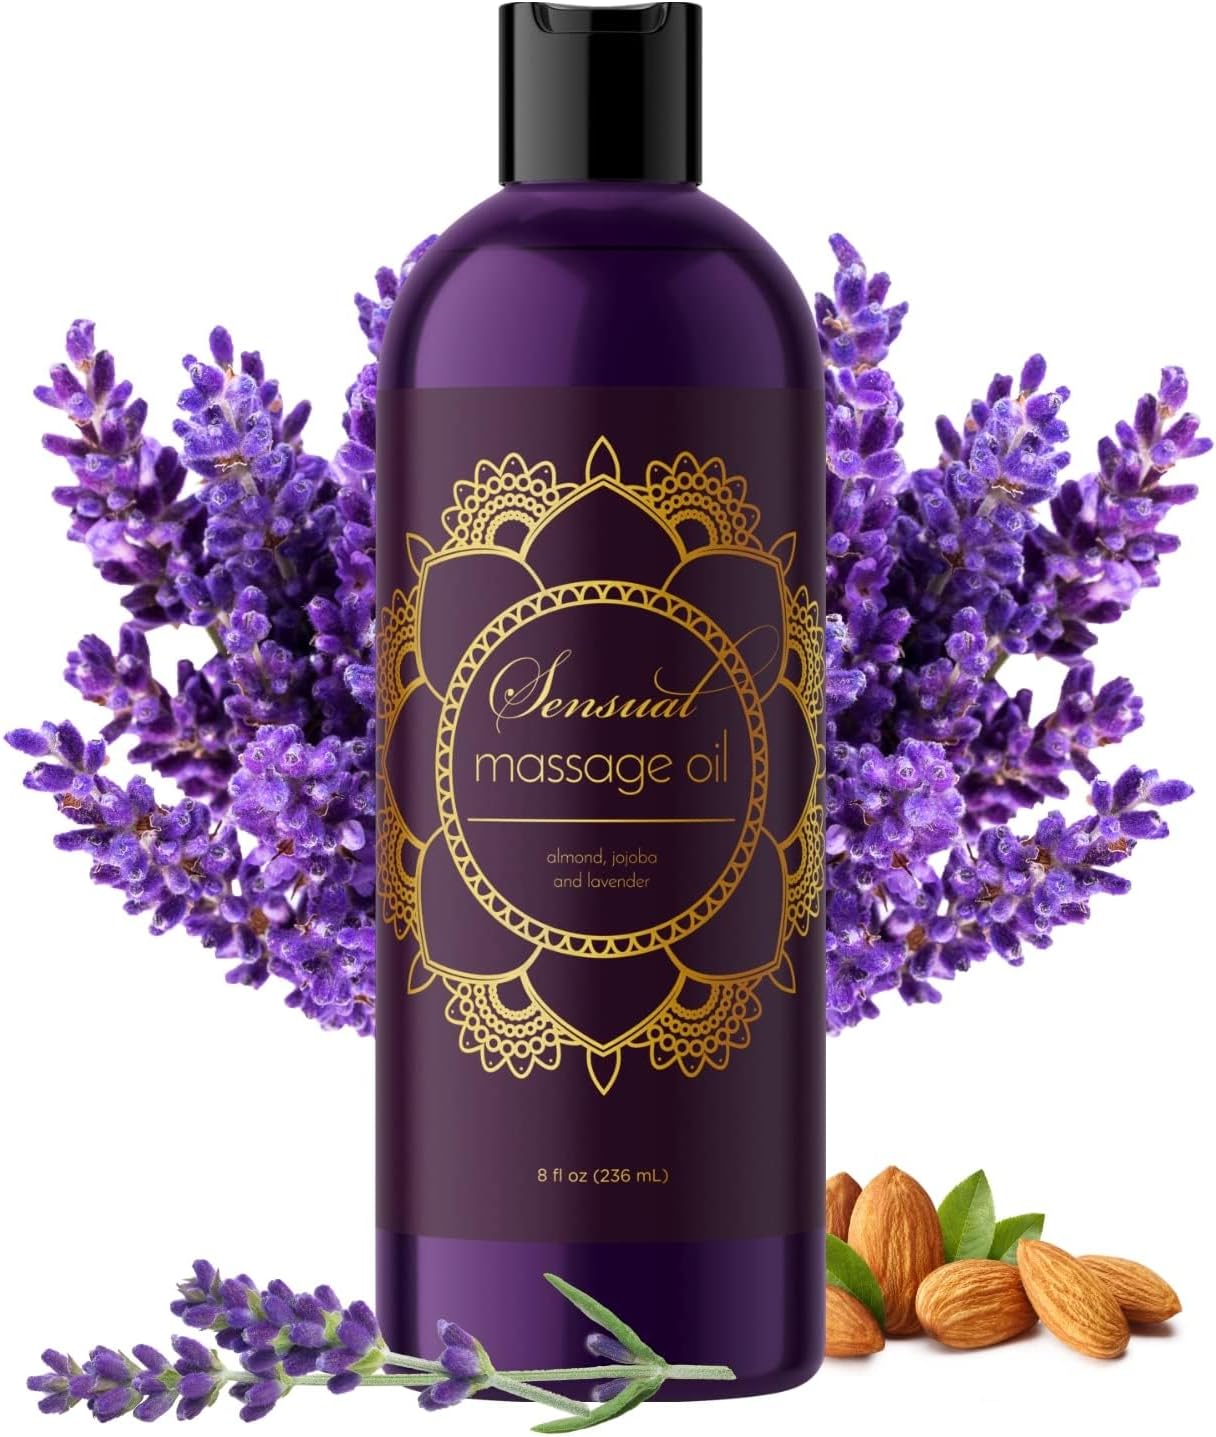 aromatherapy-sensual-massage-oil-for-couples-relaxing-full-body-massage-oil-for-date-night-with-sweet-almond-oil-vegan